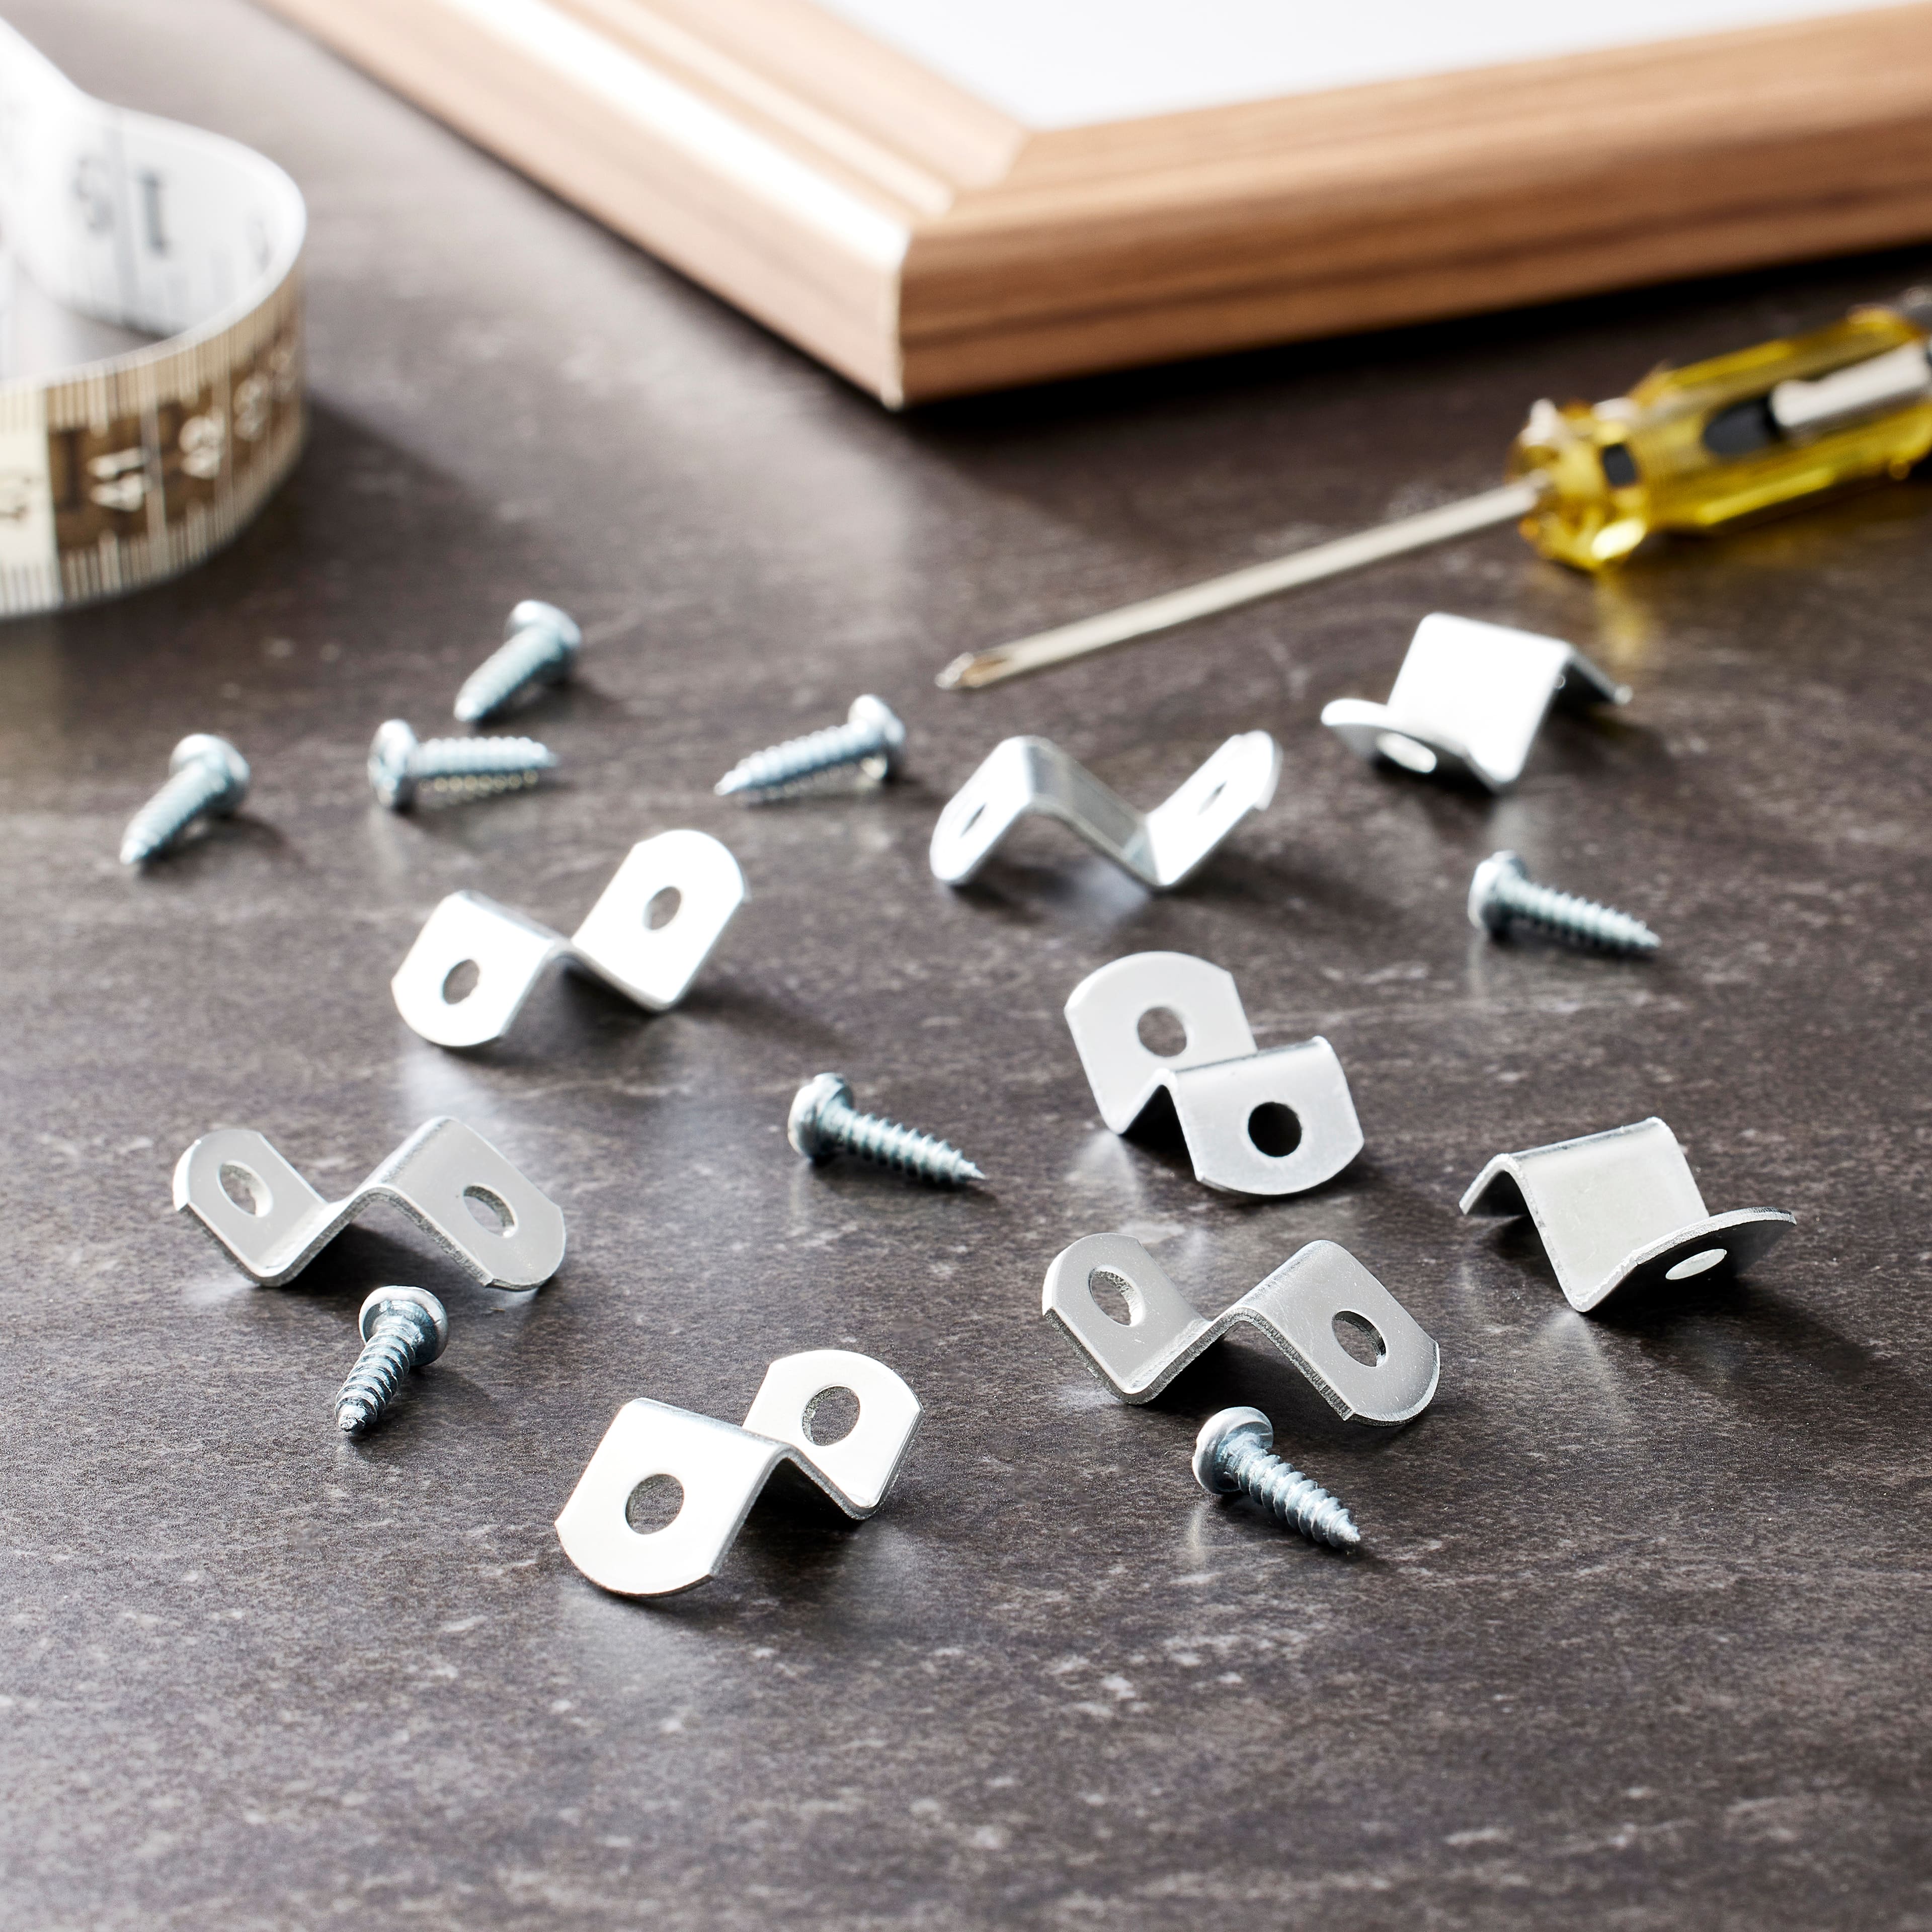 1/8 inch Offset Clips used to attach artwork to a picture frame